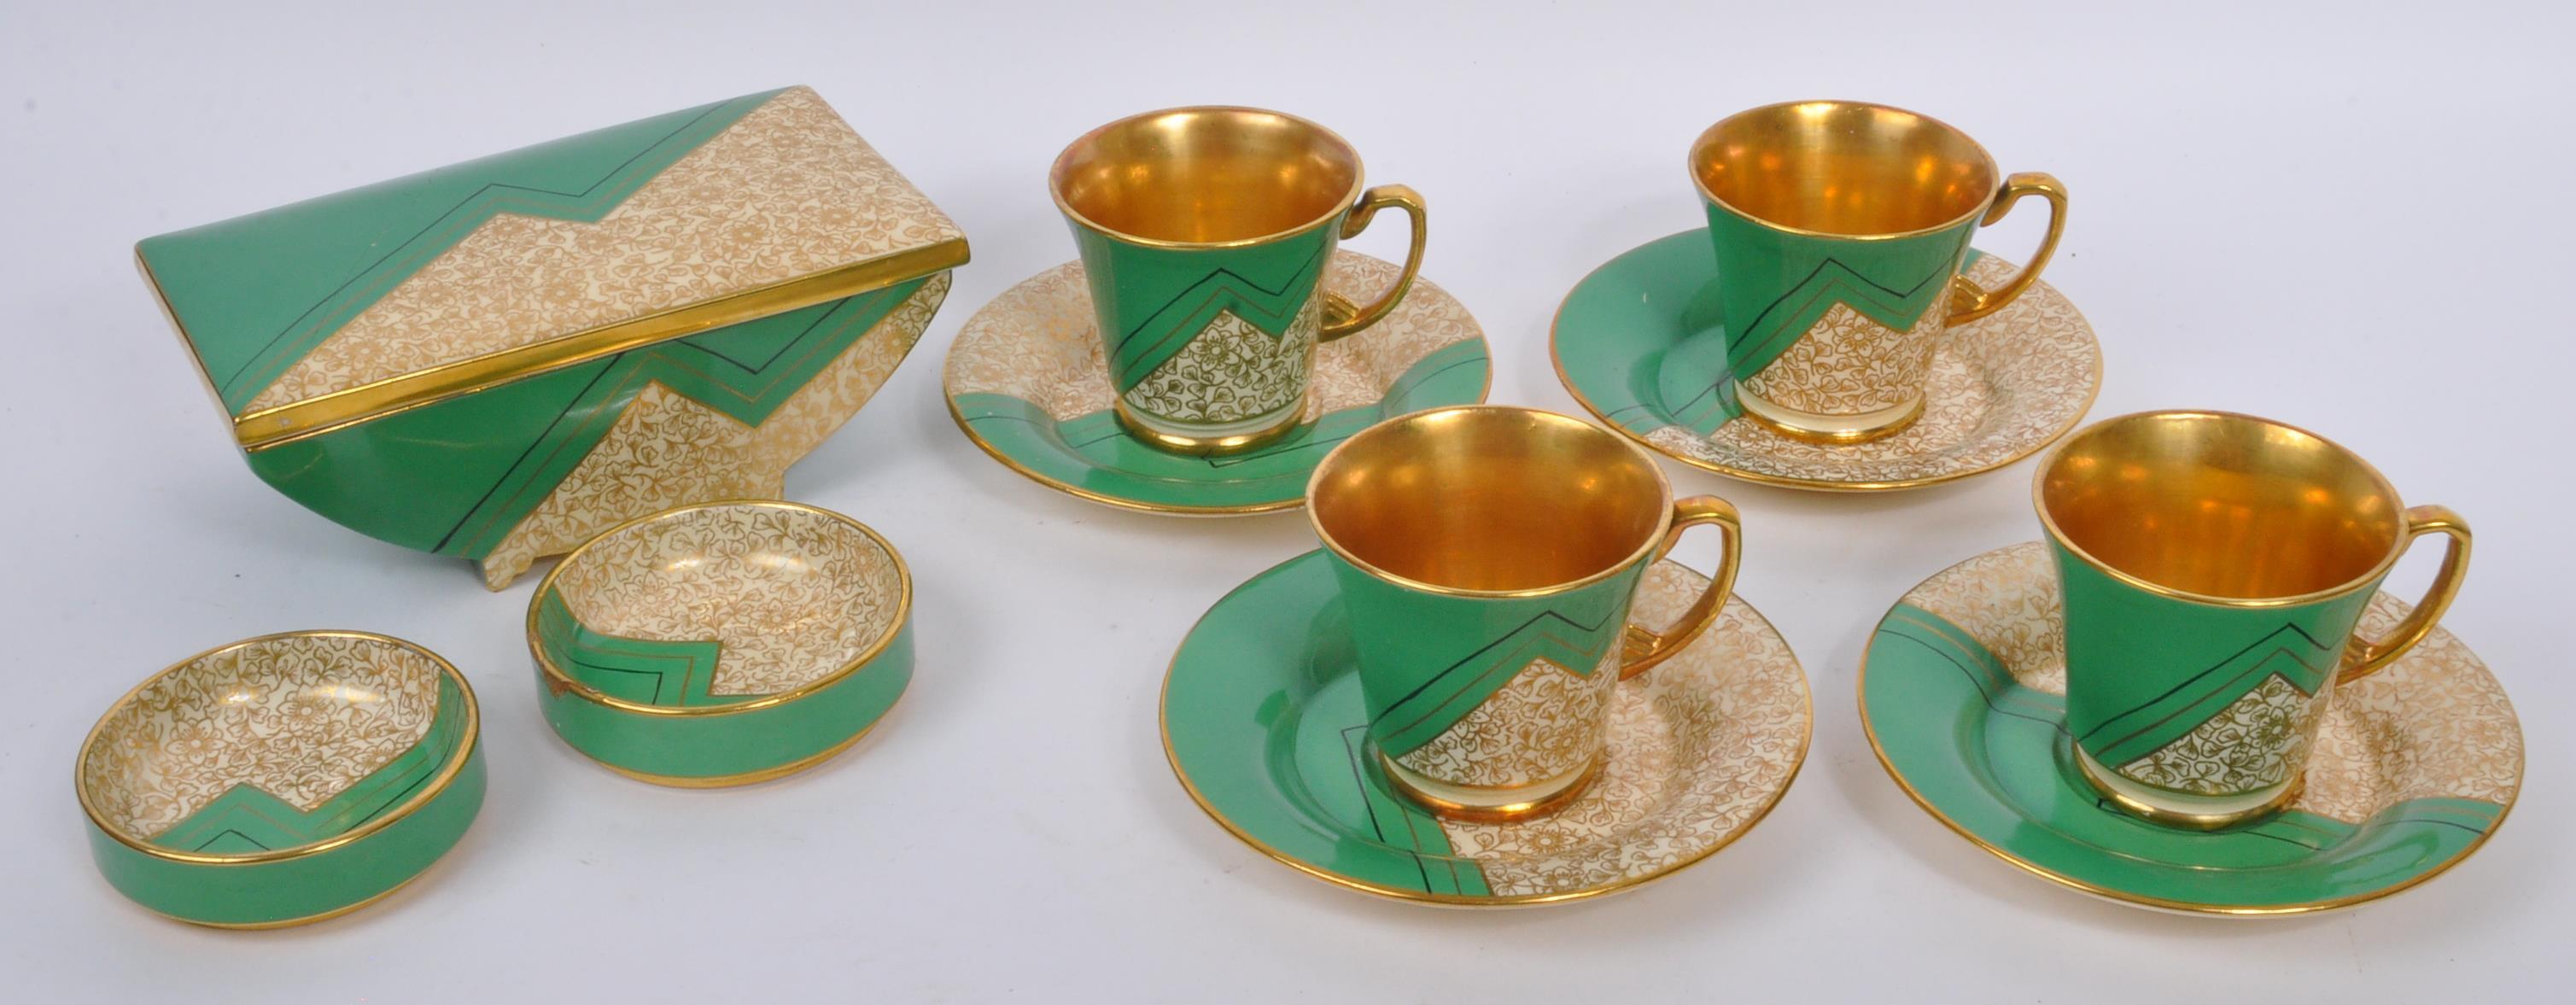 EARLY 20TH CENTURY CROWN DEVON COFFEE SERVICE - Image 2 of 5